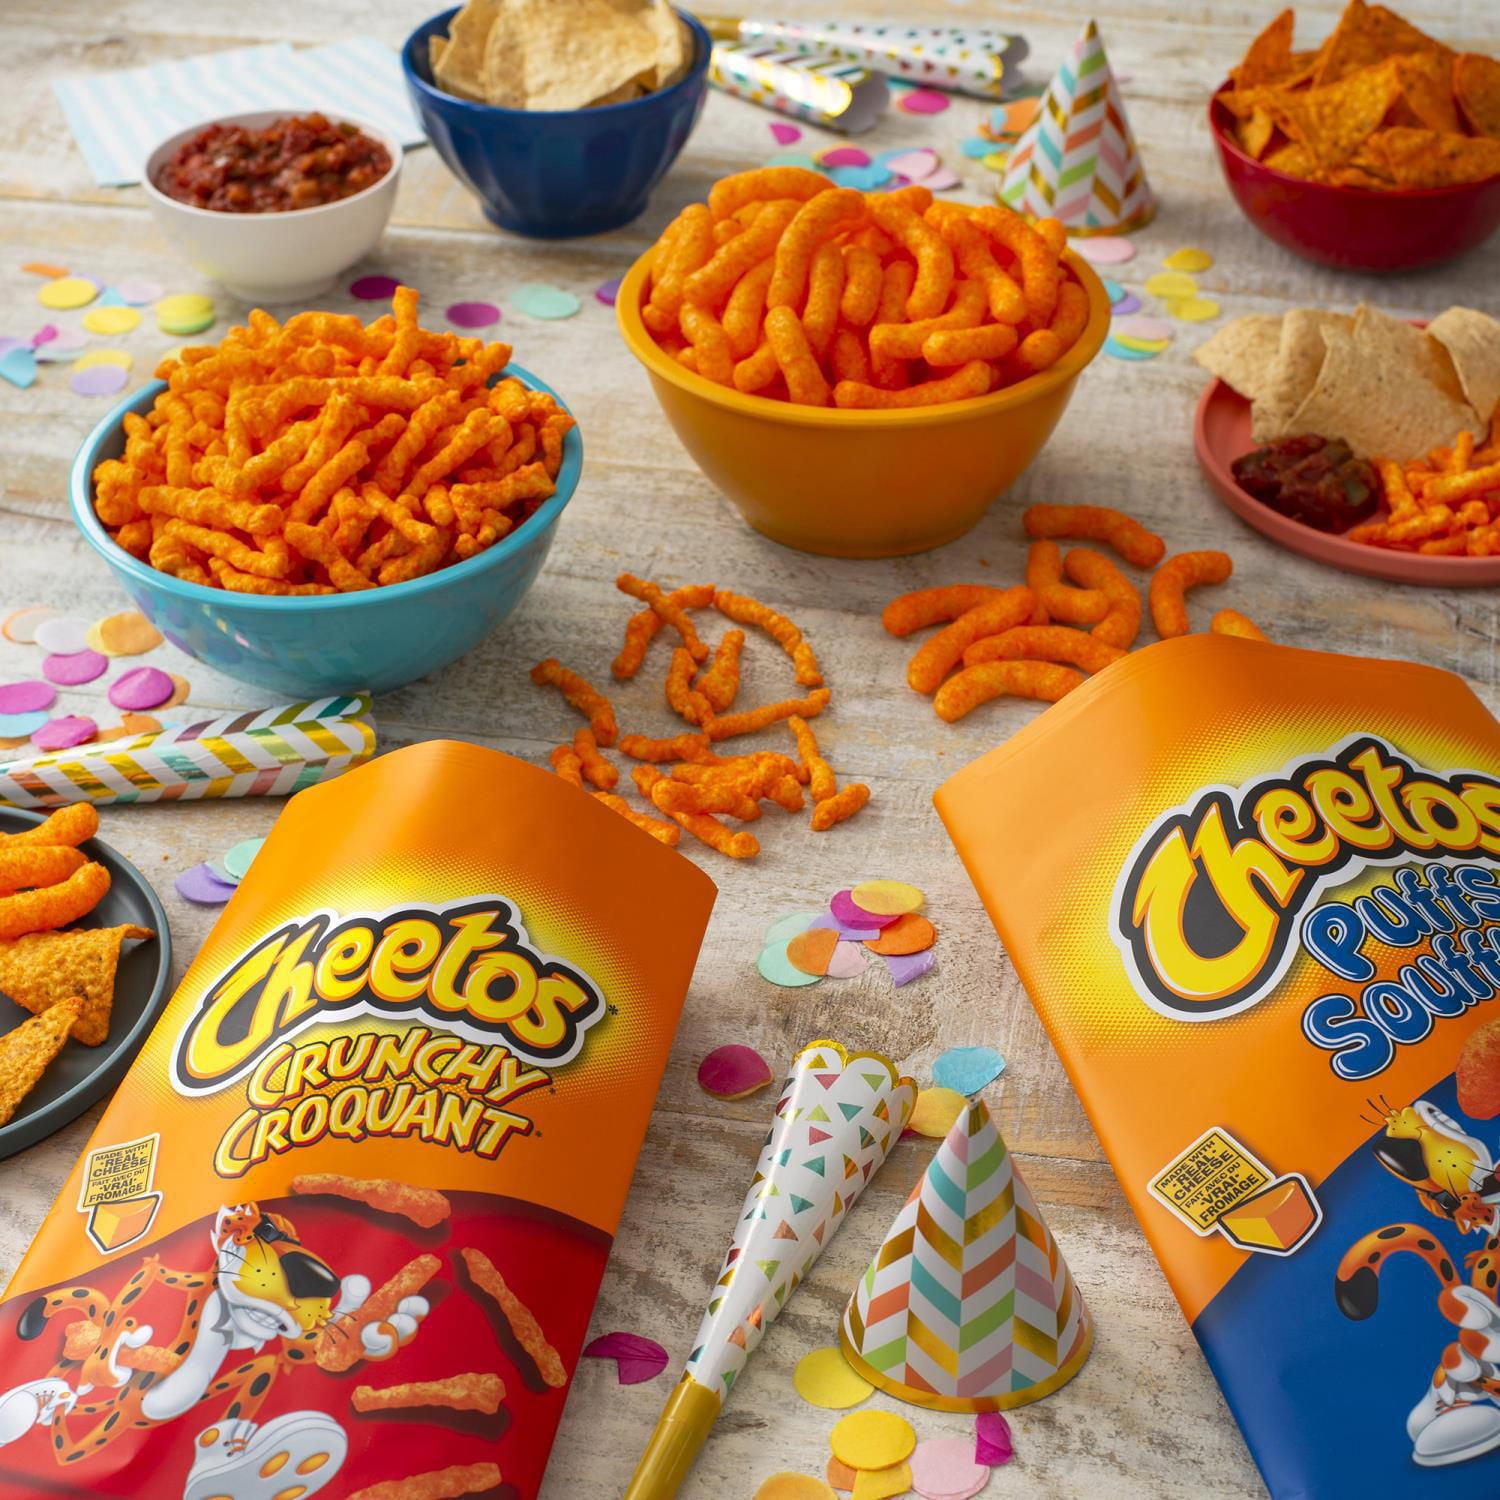 NEW CHEETOS CRUNCHY CHIPS PARTY SIZE 15 OZ BAG CHEESE FLAVORED SNACKS